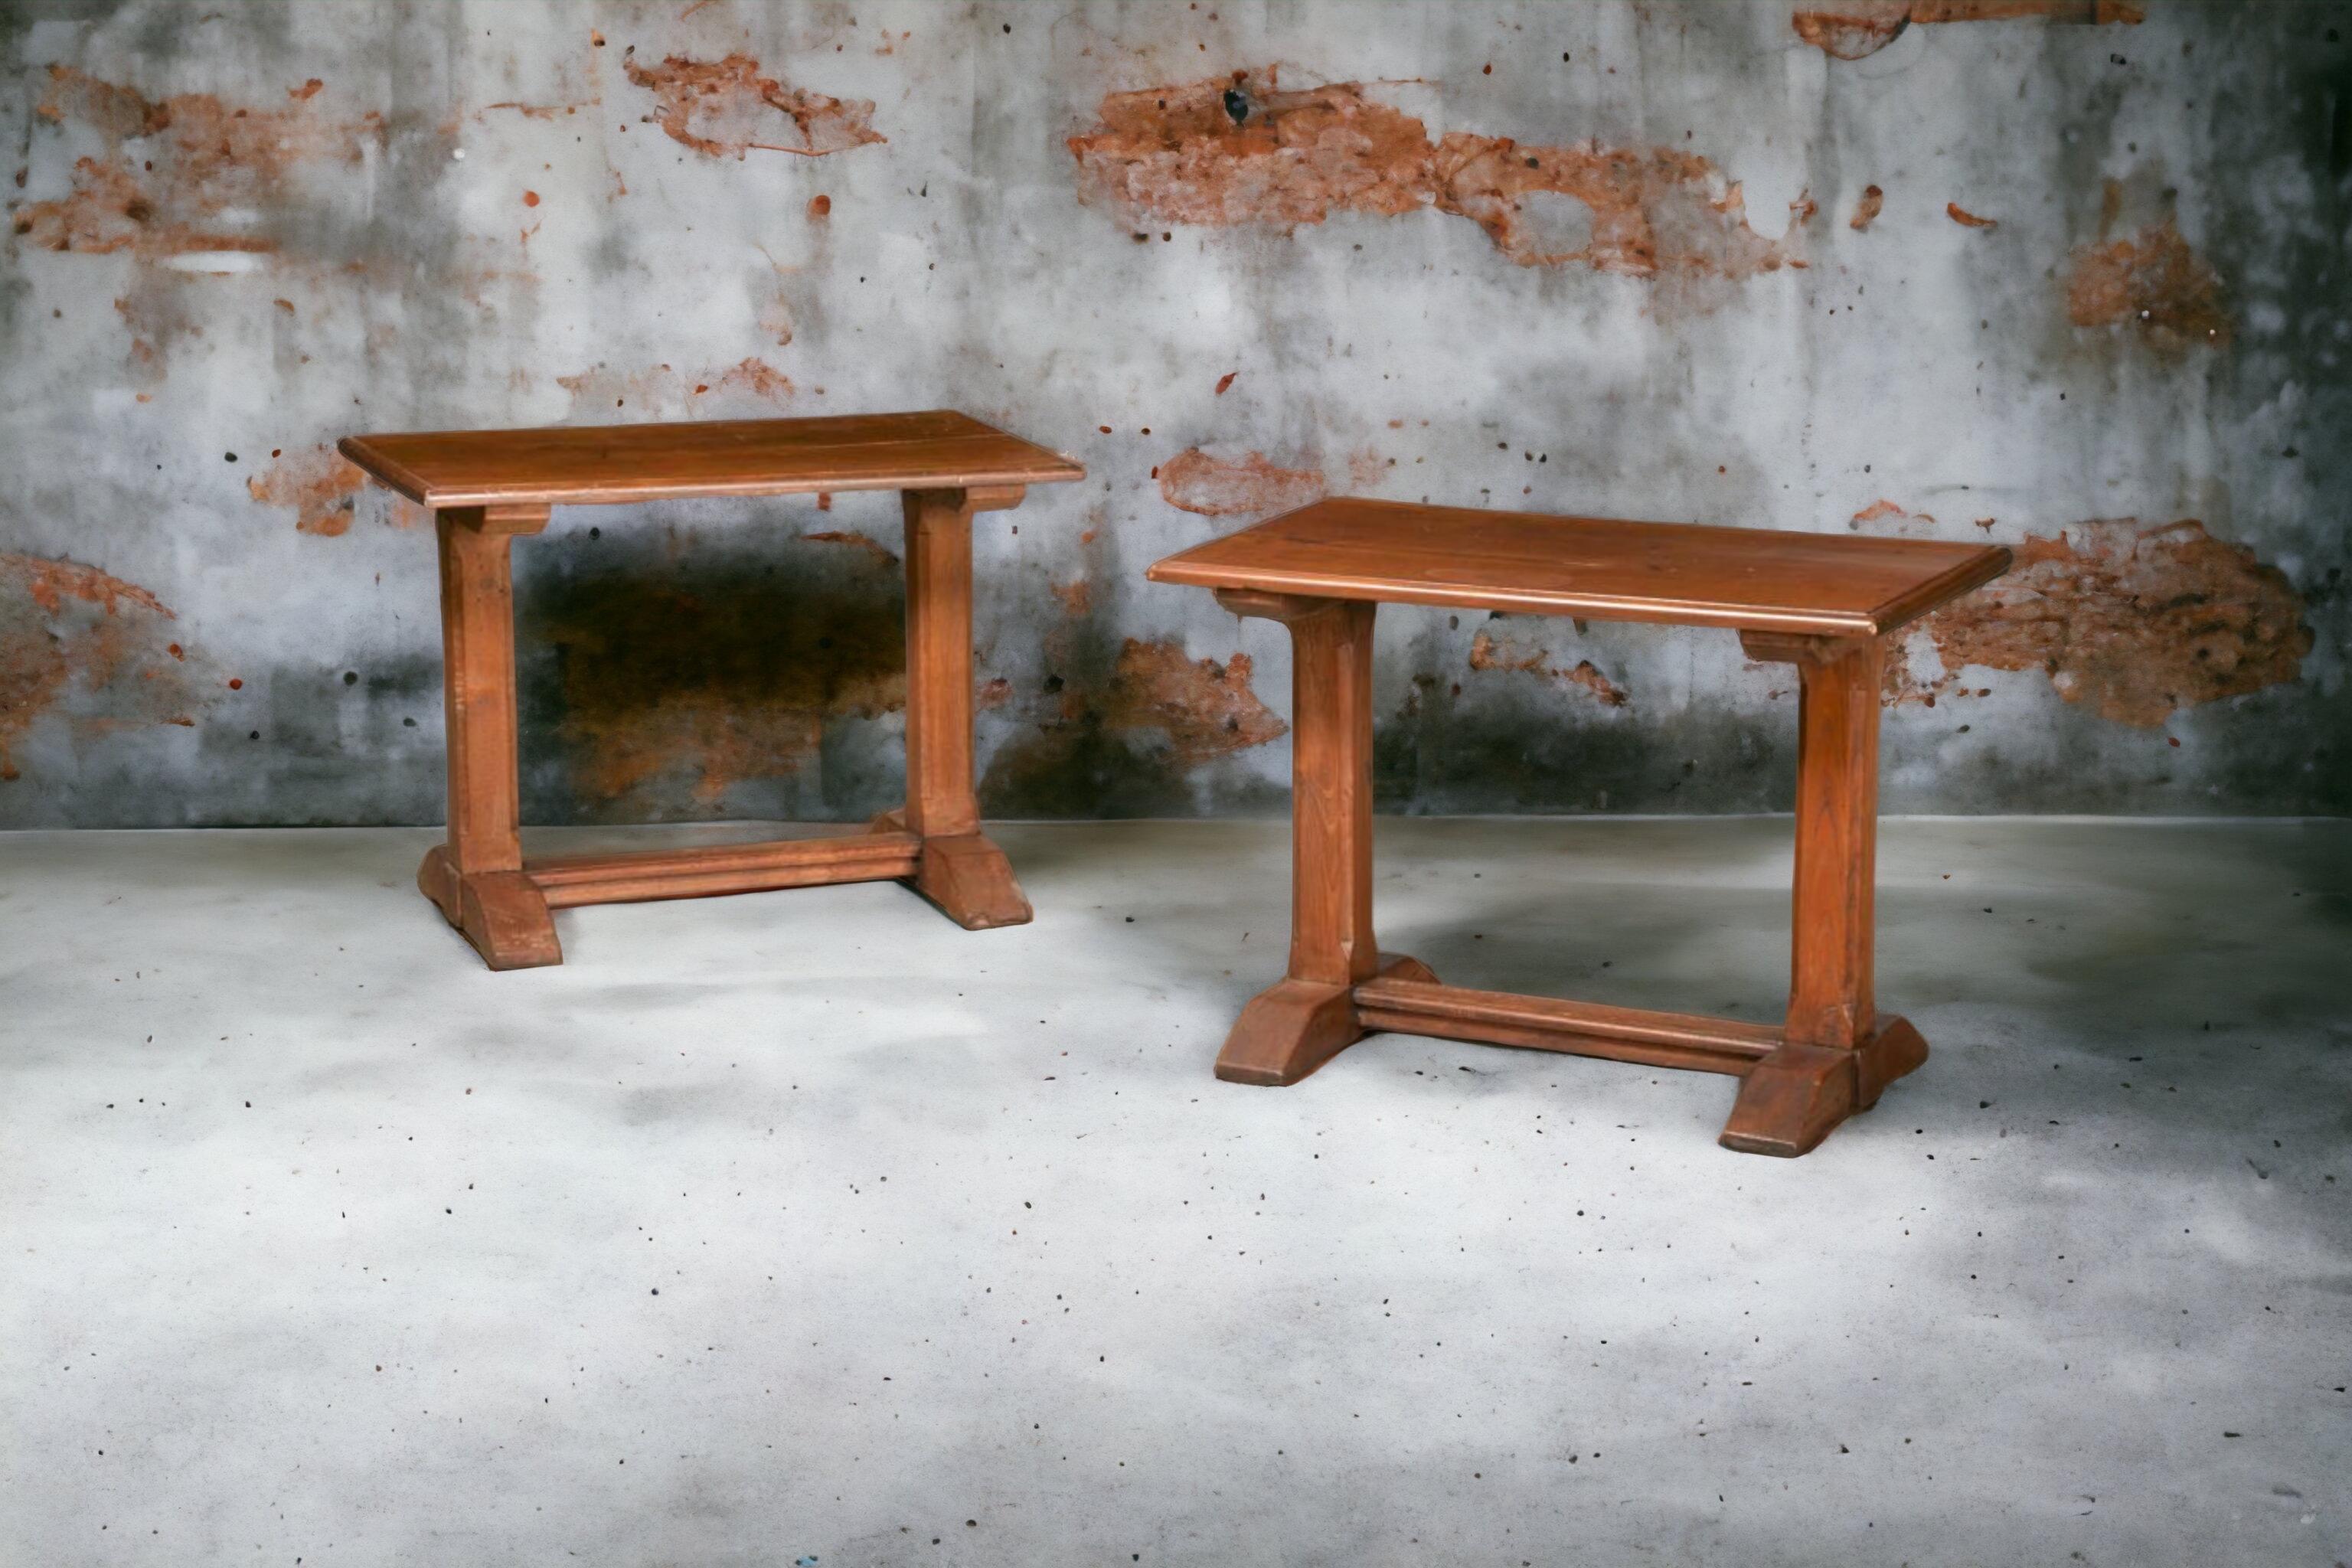 20th-C. Rustic Primitive French Carved Walnut Side Tables Att. To Grange - Pair 2